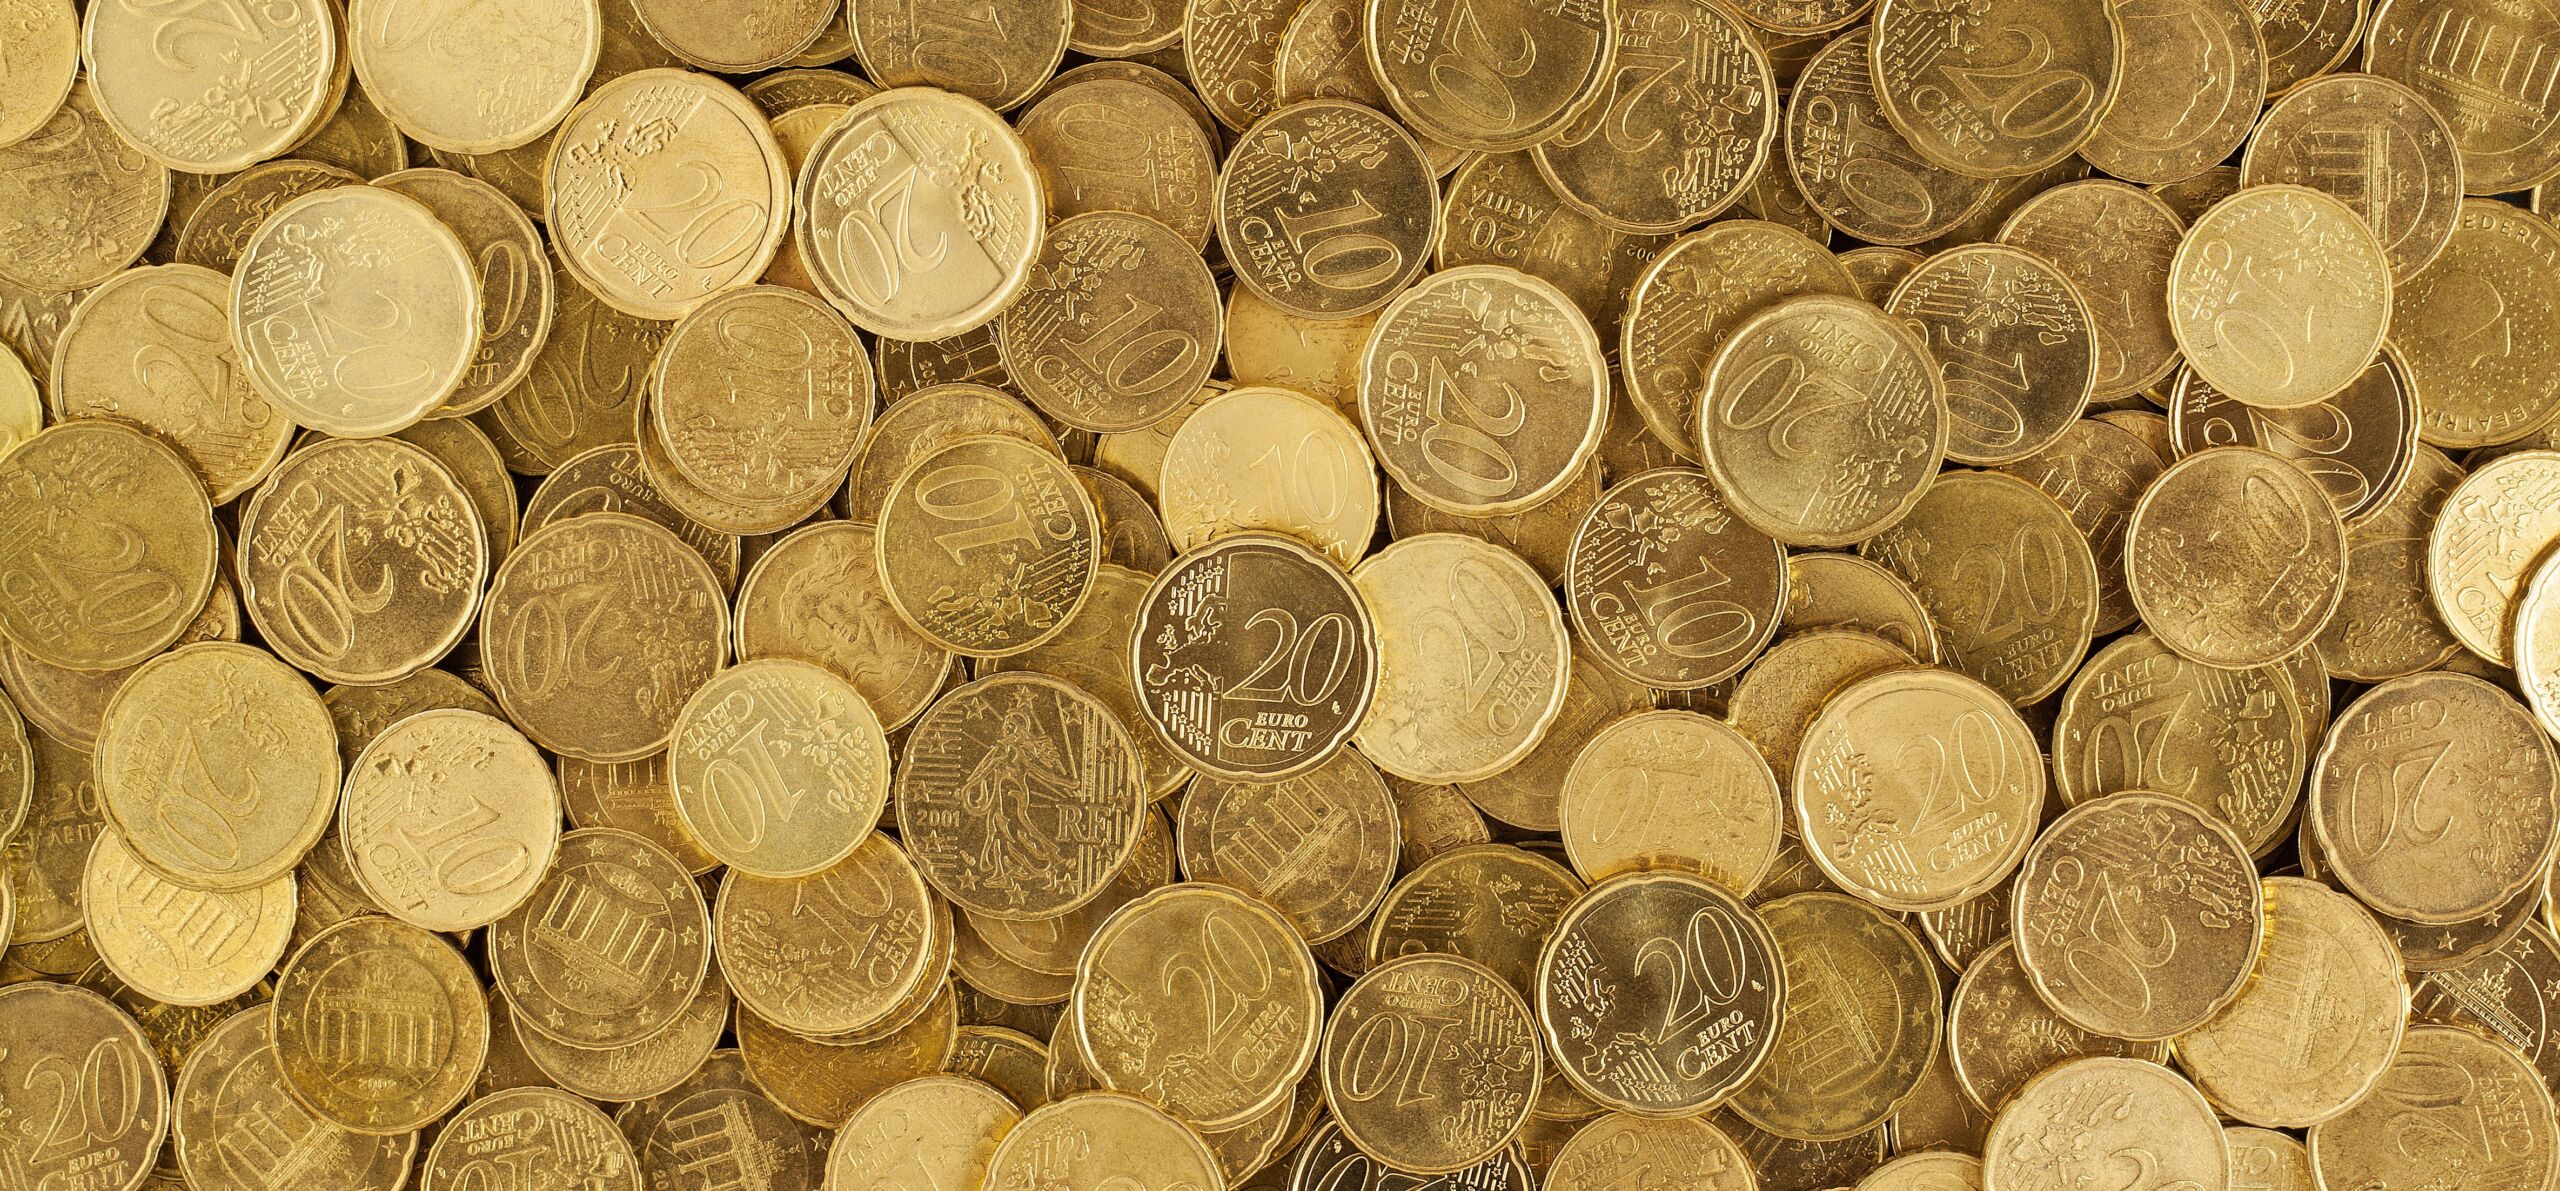 Gold Coins for Gemstone Prices